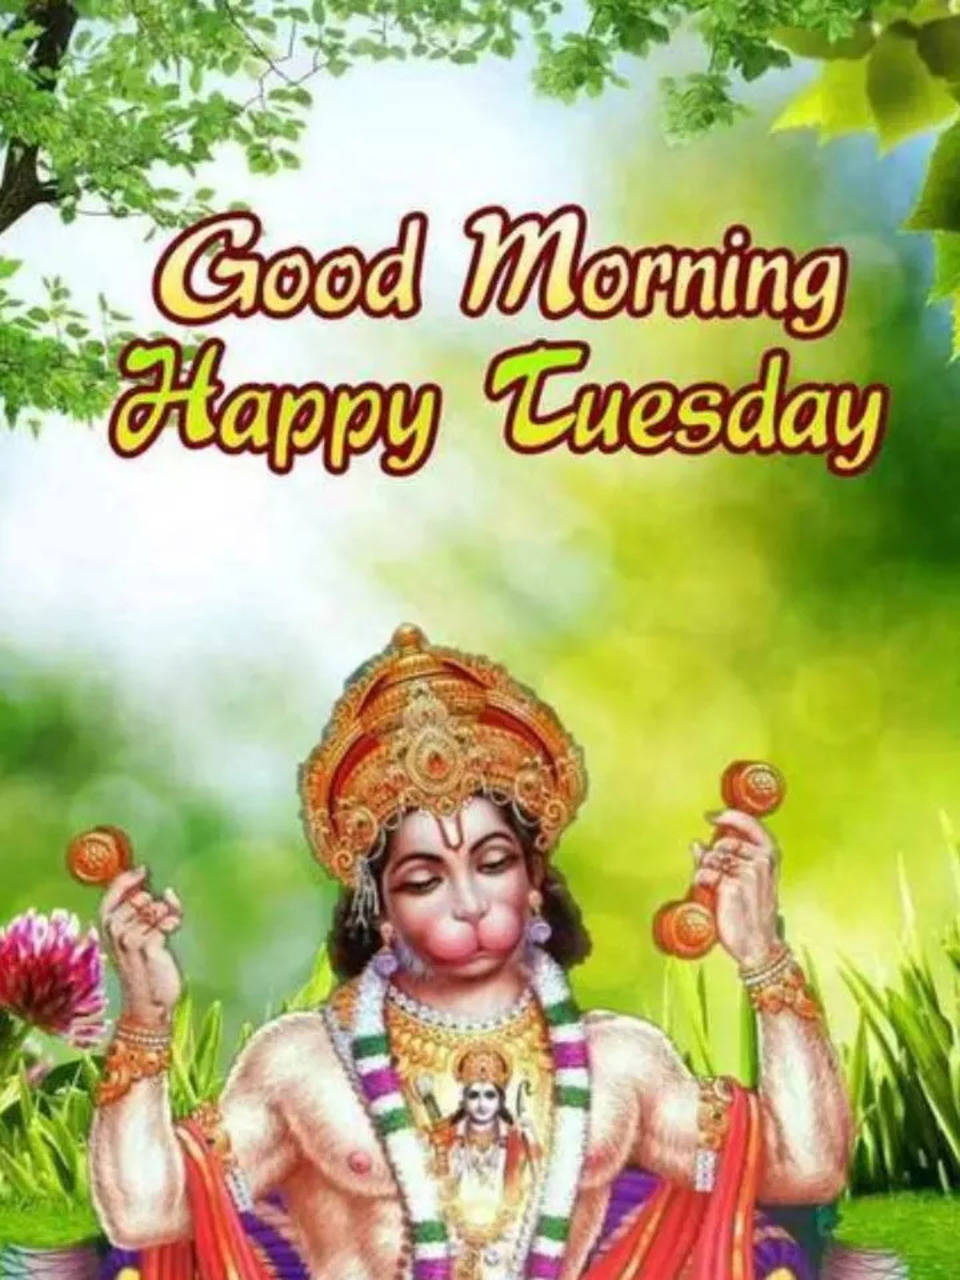 Tuesday Good morning wishes images with Quotes- 10 January God ...